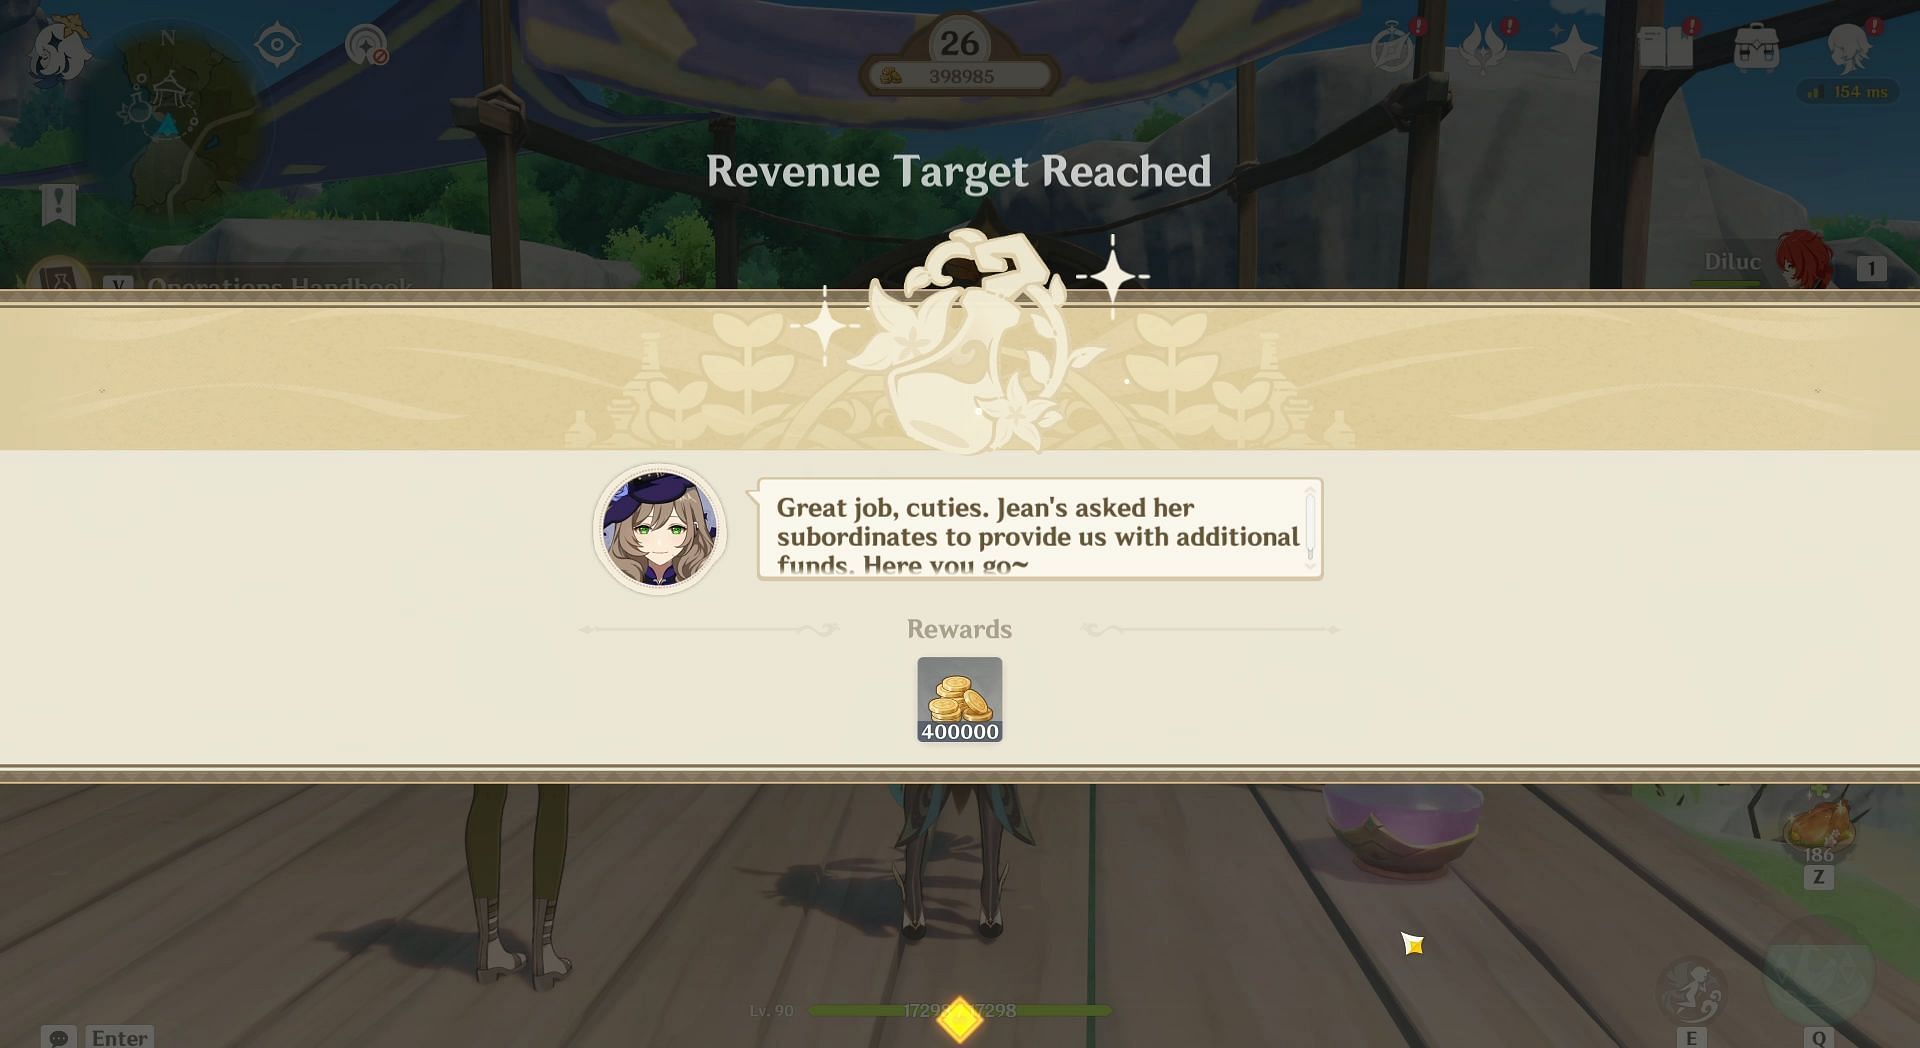 Reach revenue target to get Funds from sponsors (Image via HoYoverse)